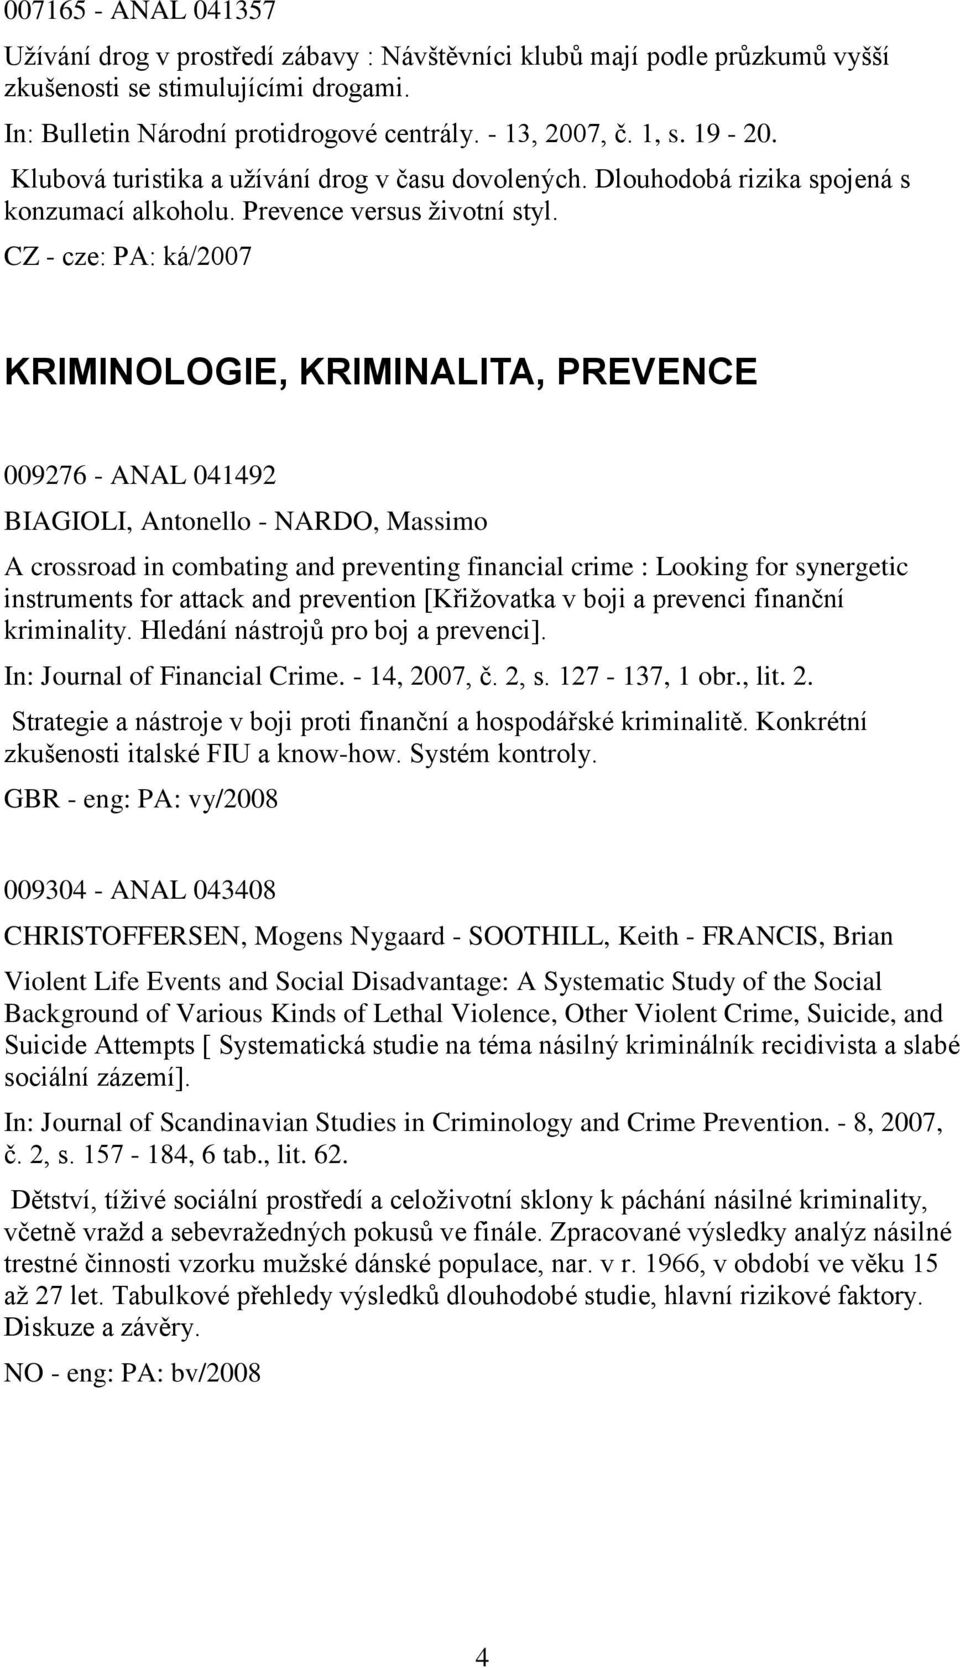 CZ - cze: PA: ká/2007 KRIMINOLOGIE, KRIMINALITA, PREVENCE 009276 - ANAL 041492 BIAGIOLI, Antonello - NARDO, Massimo A crossroad in combating and preventing financial crime : Looking for synergetic